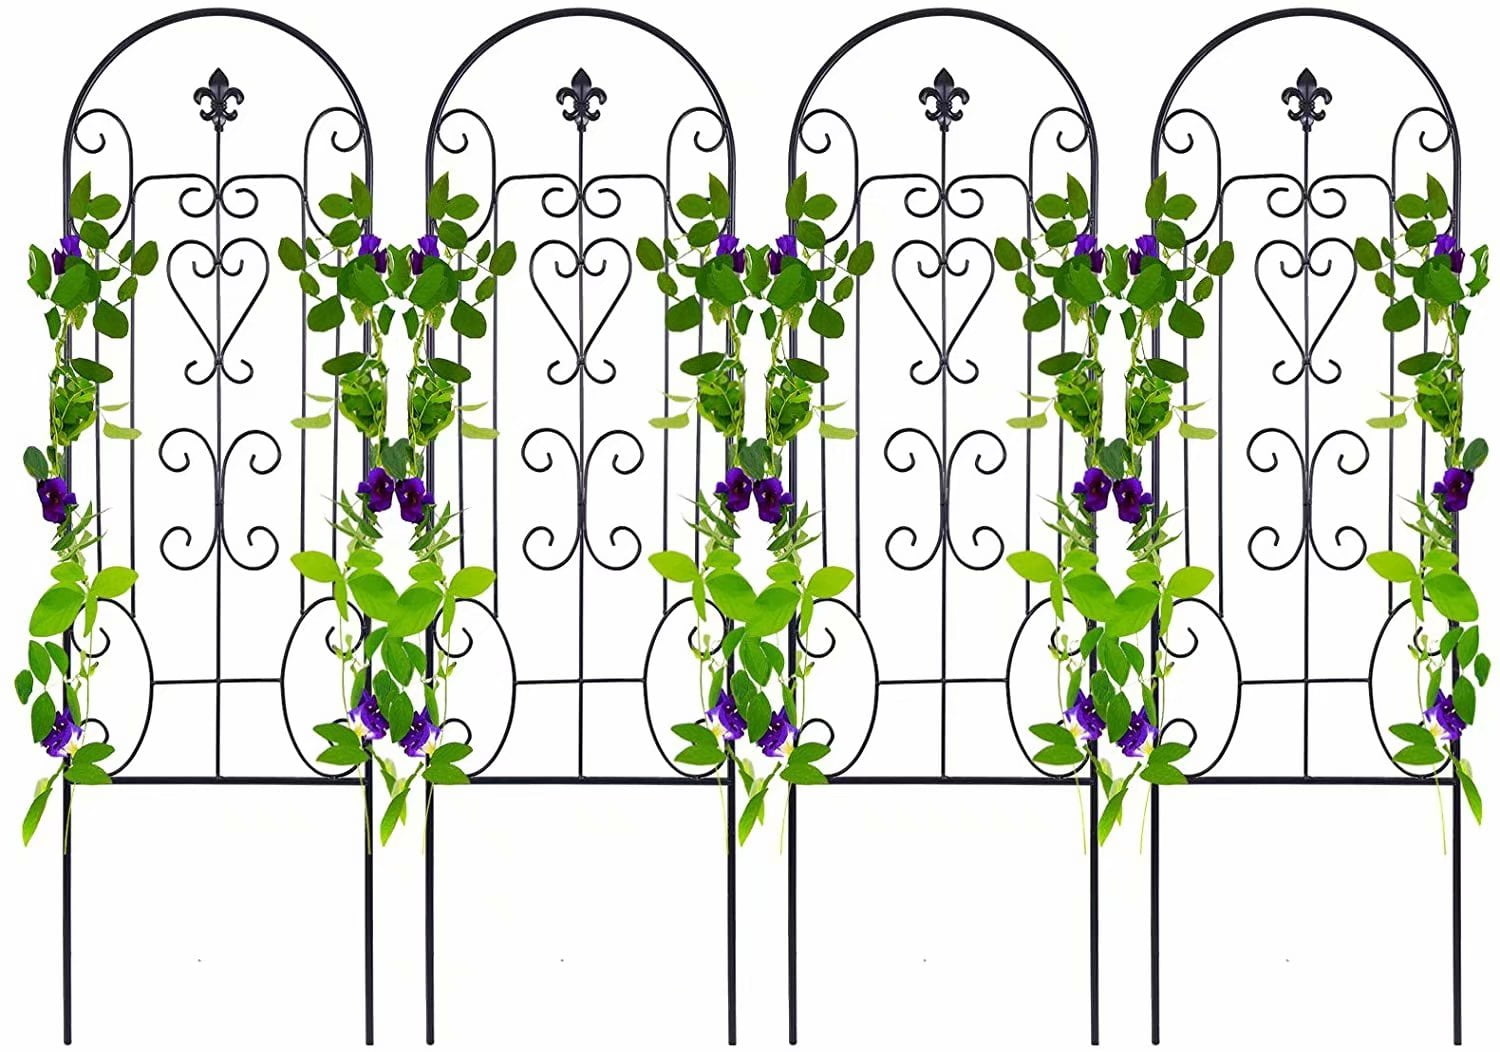 Details about   Garden Trellis for Climbing Plants Black Iron Potted Support Vines Metal Wire 